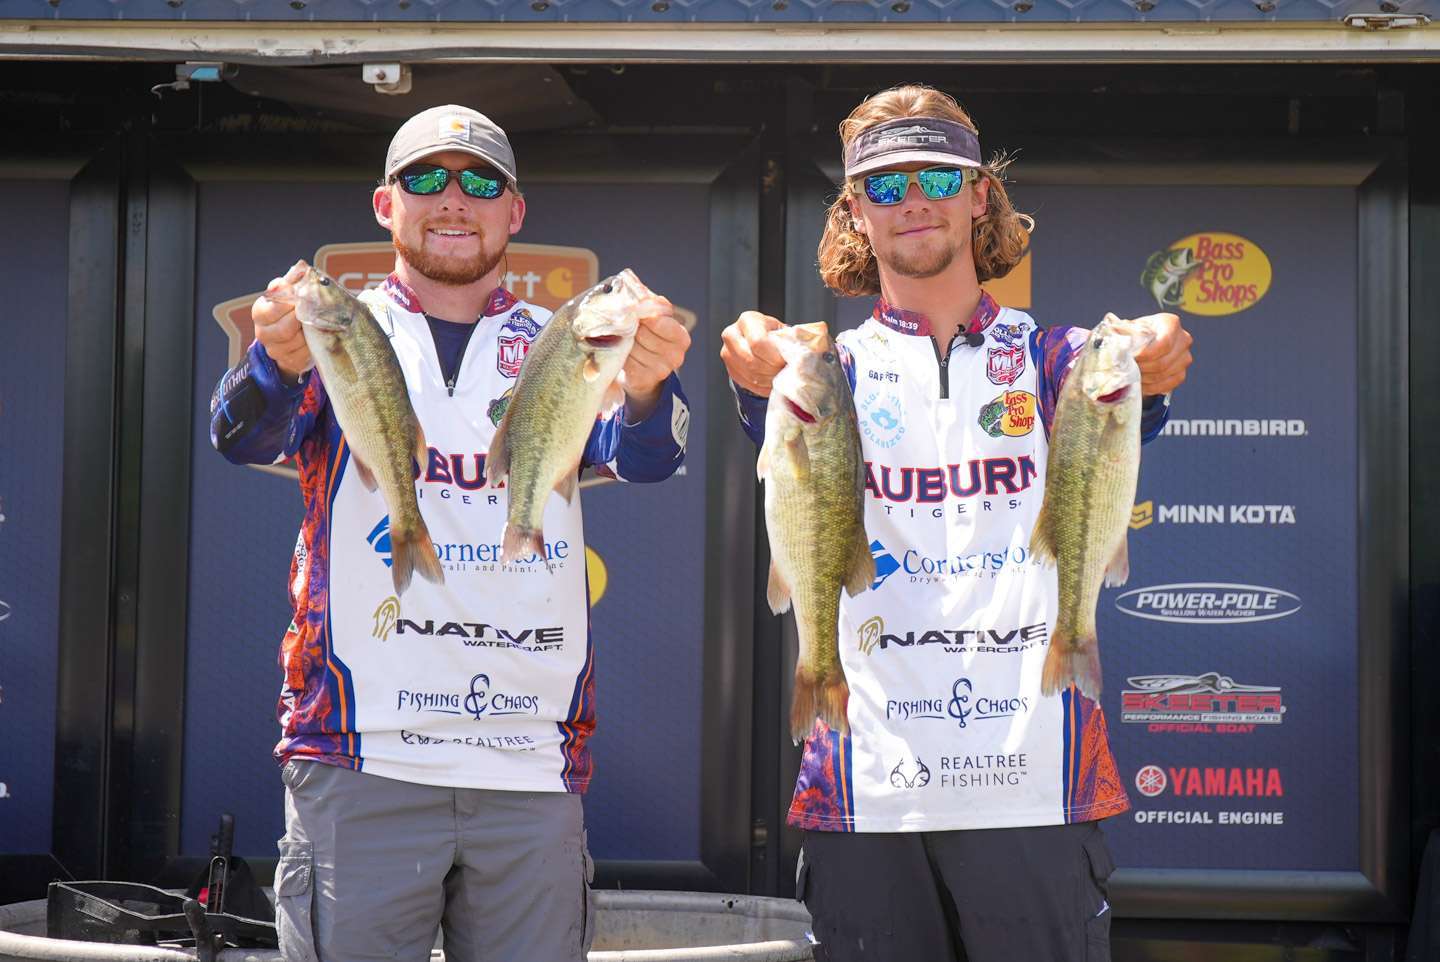 <b>Garrett Warren - Hayden Marbut, Auburn University</b><br>  Auburn’s Garrett Warren (right) saw success during the 2021 season fishing with Will Jones. The duo notched three Top 50 finishes and ended the season in sixth place in the Team of the Year race. In 2022, Warren will team up with former Bassmaster High School All-American and High School National Champion Hayden Marbut (not pictured). Look for this talented team to make a statement this season. 